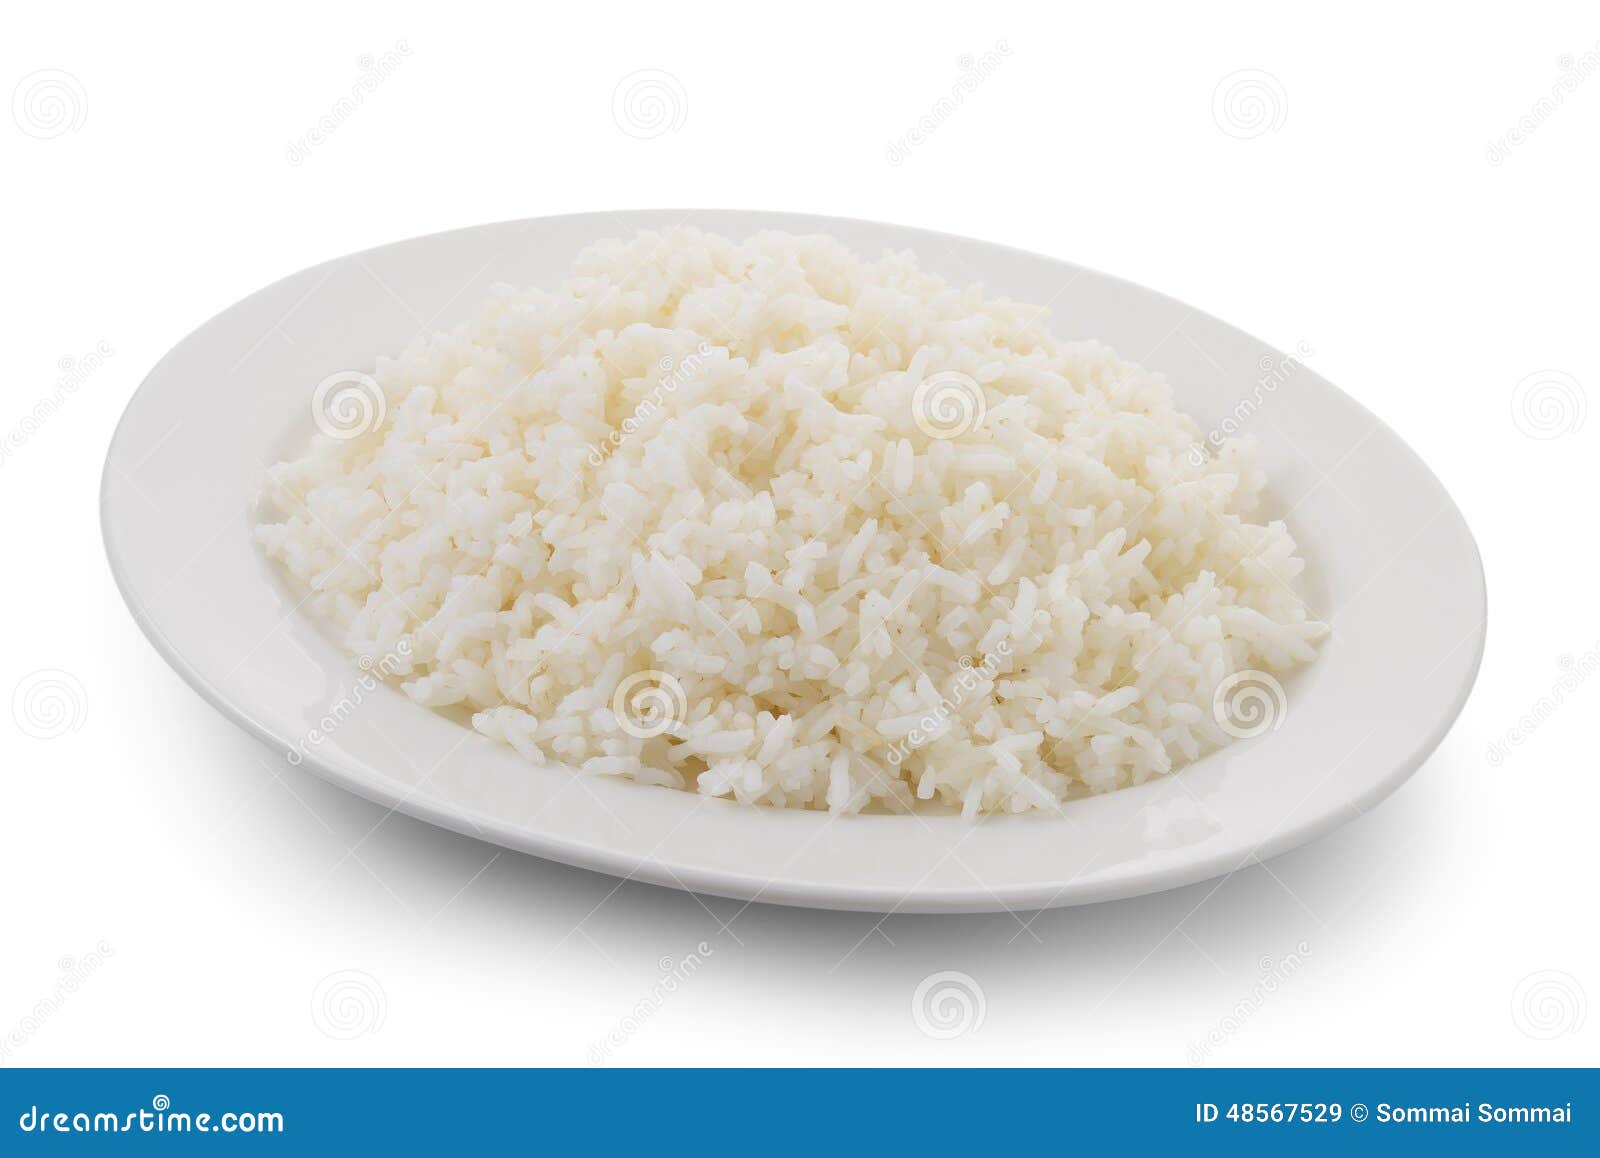 cooked rice in a white plate